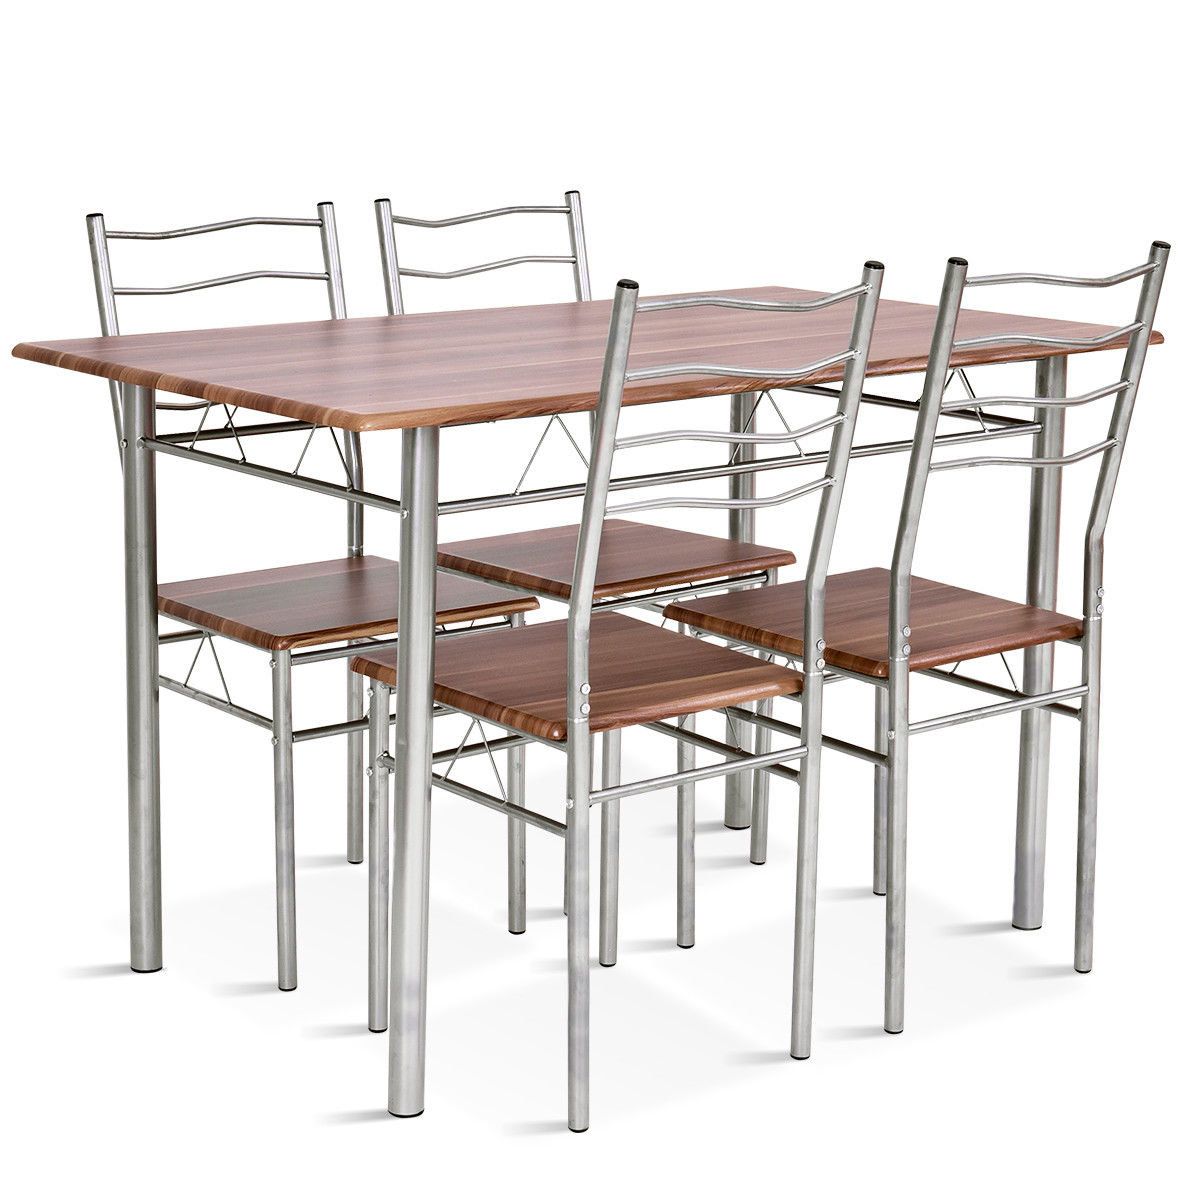 Casiano 5 Piece Dining Set Within Well Known Stouferberg 5 Piece Dining Sets (View 7 of 20)